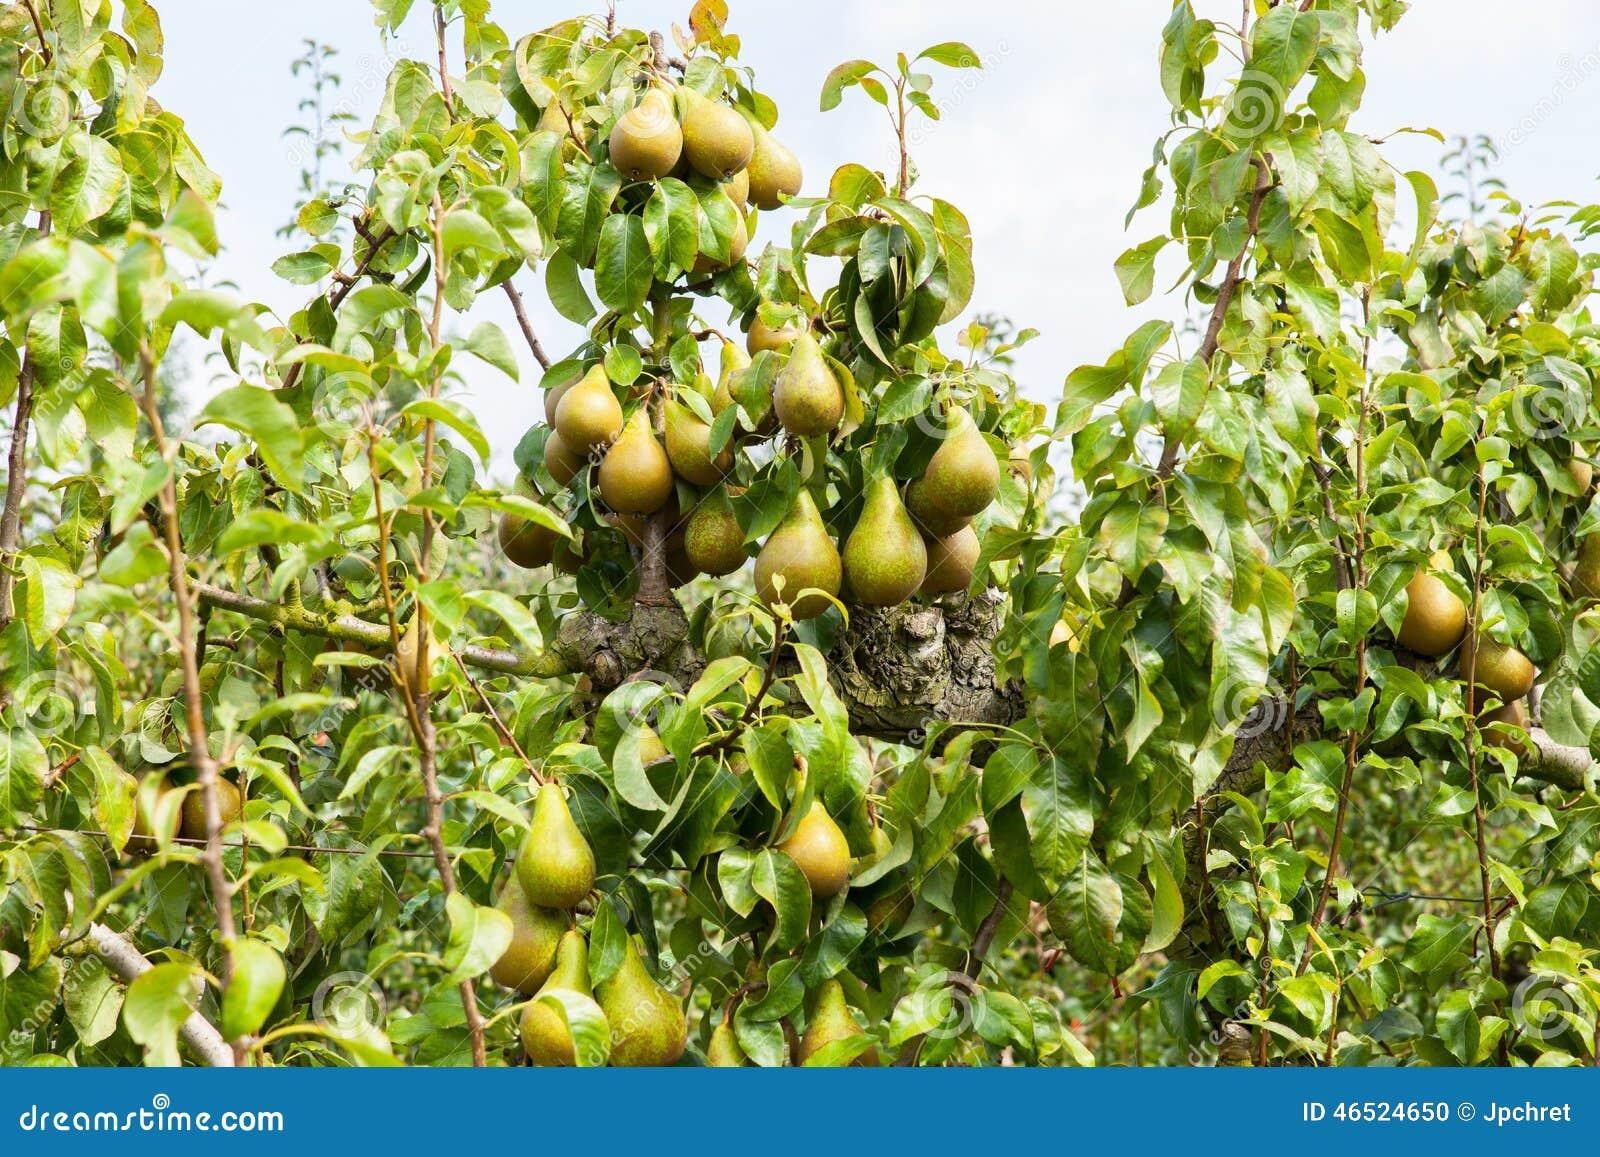 pear trees laden with fruit in an orchard